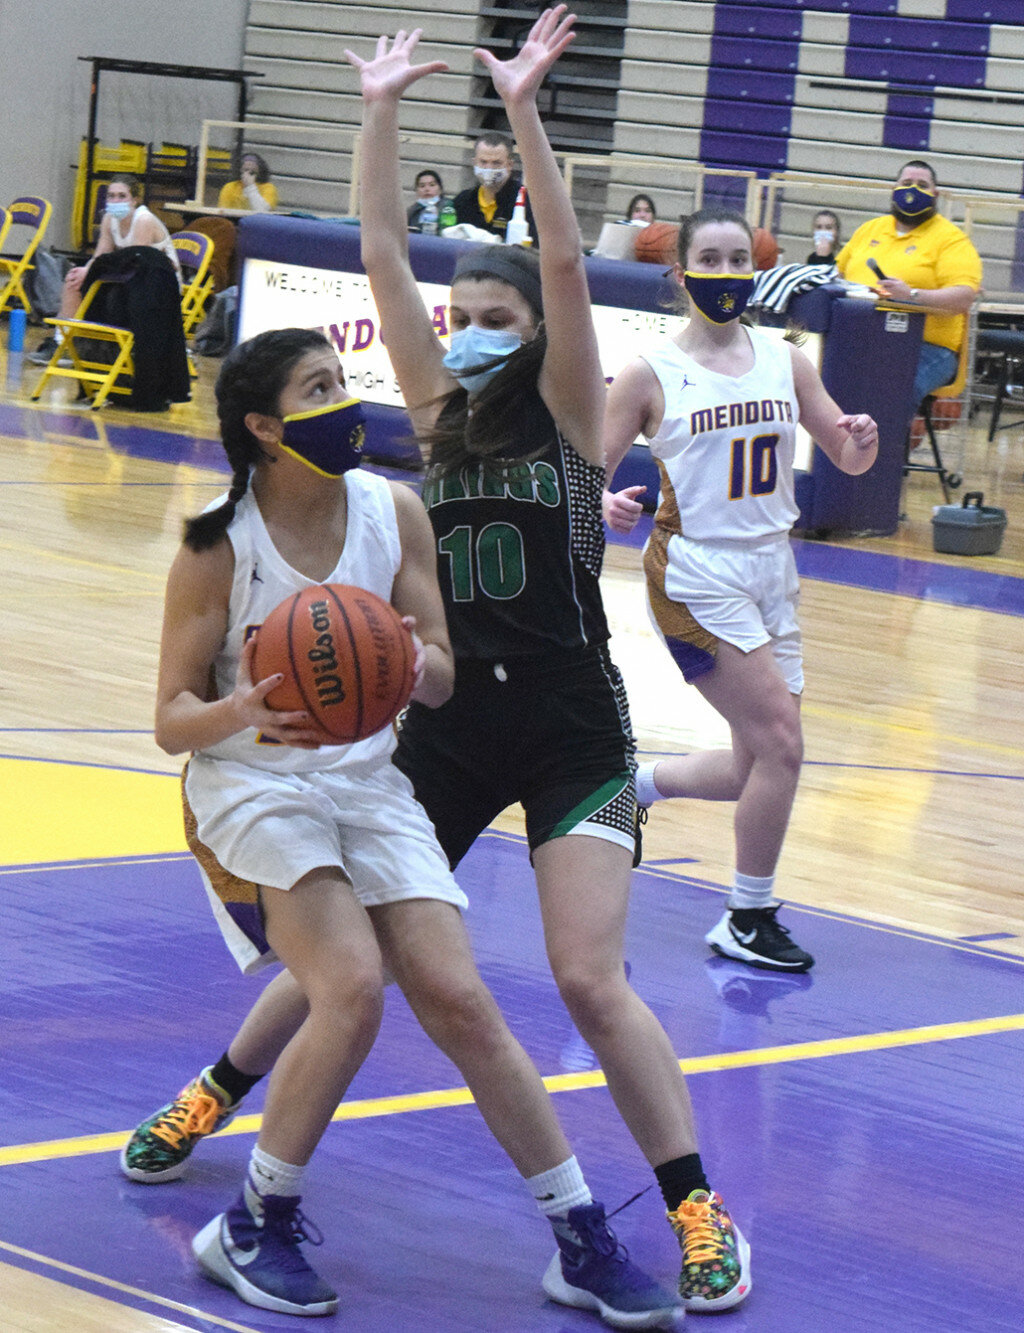 Mendota’s Daisy Arteaga drives into the lane and looks for room to shoot over the defense of North Boone’s Makenzie Yarc on Feb. 6 at the MHS gym. (Reporter photo)